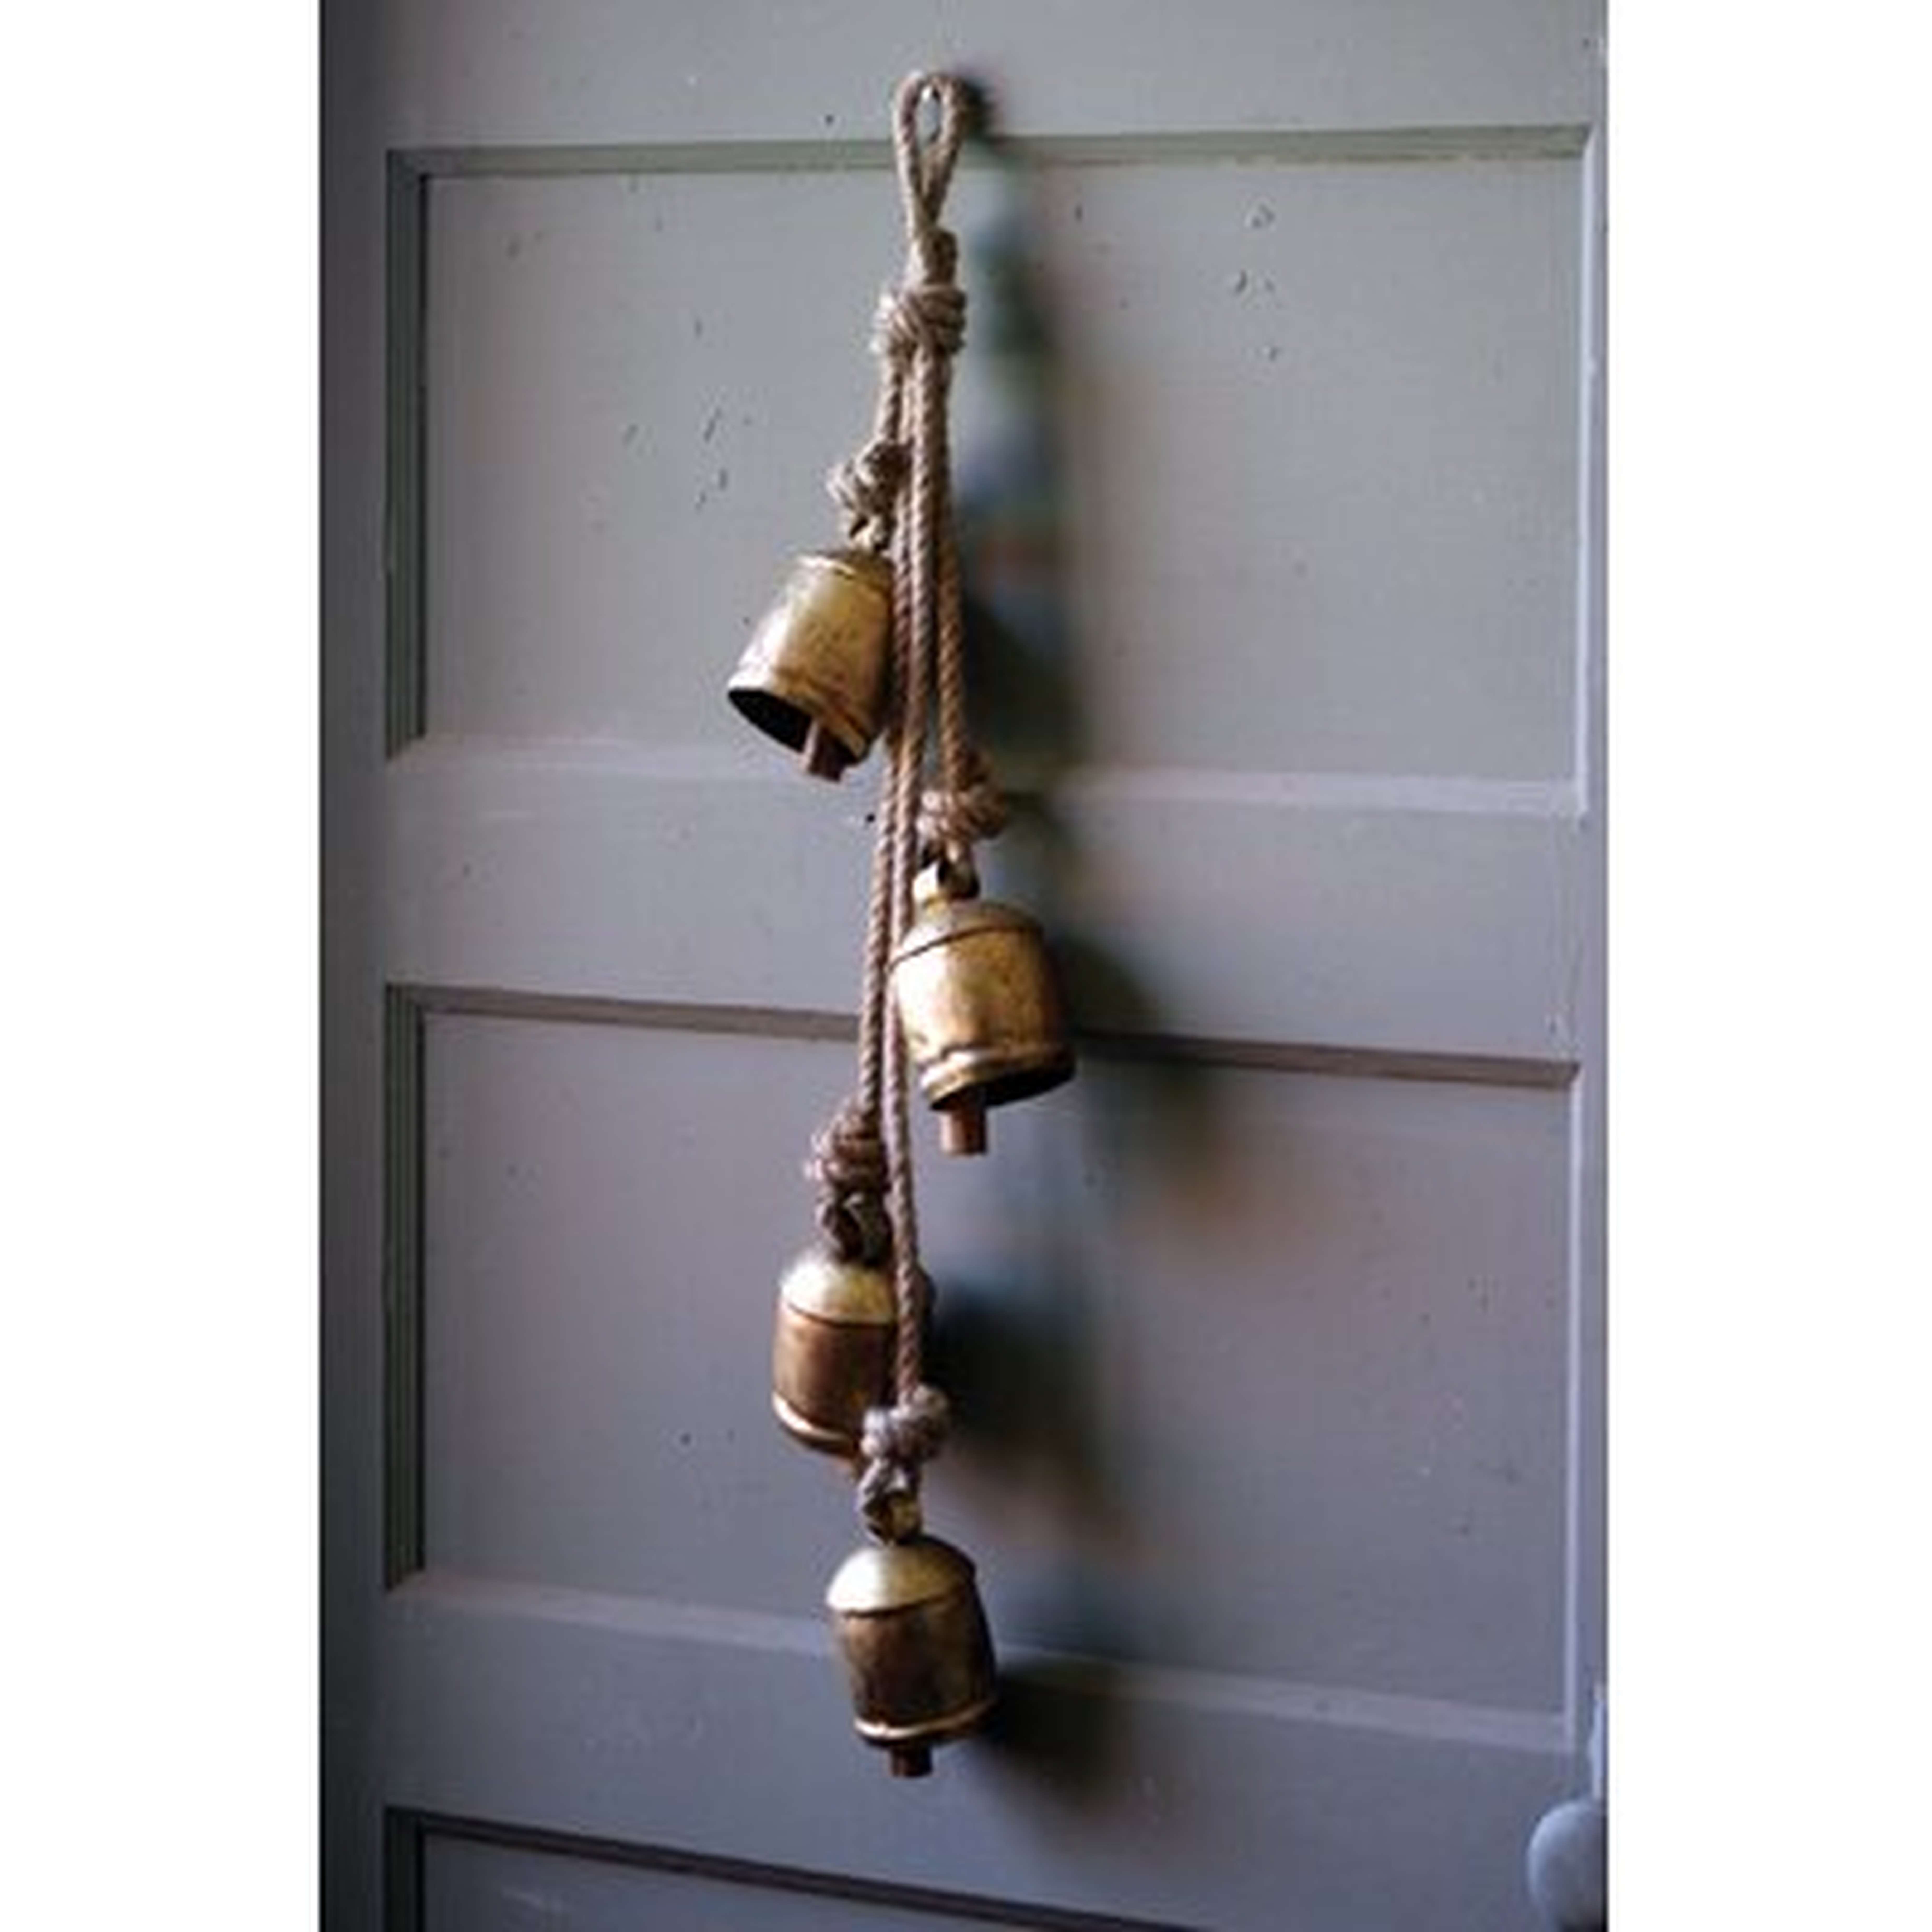 4 Piece Rustic Iron Hanging Bells with Rope Wall Décor Set - Birch Lane